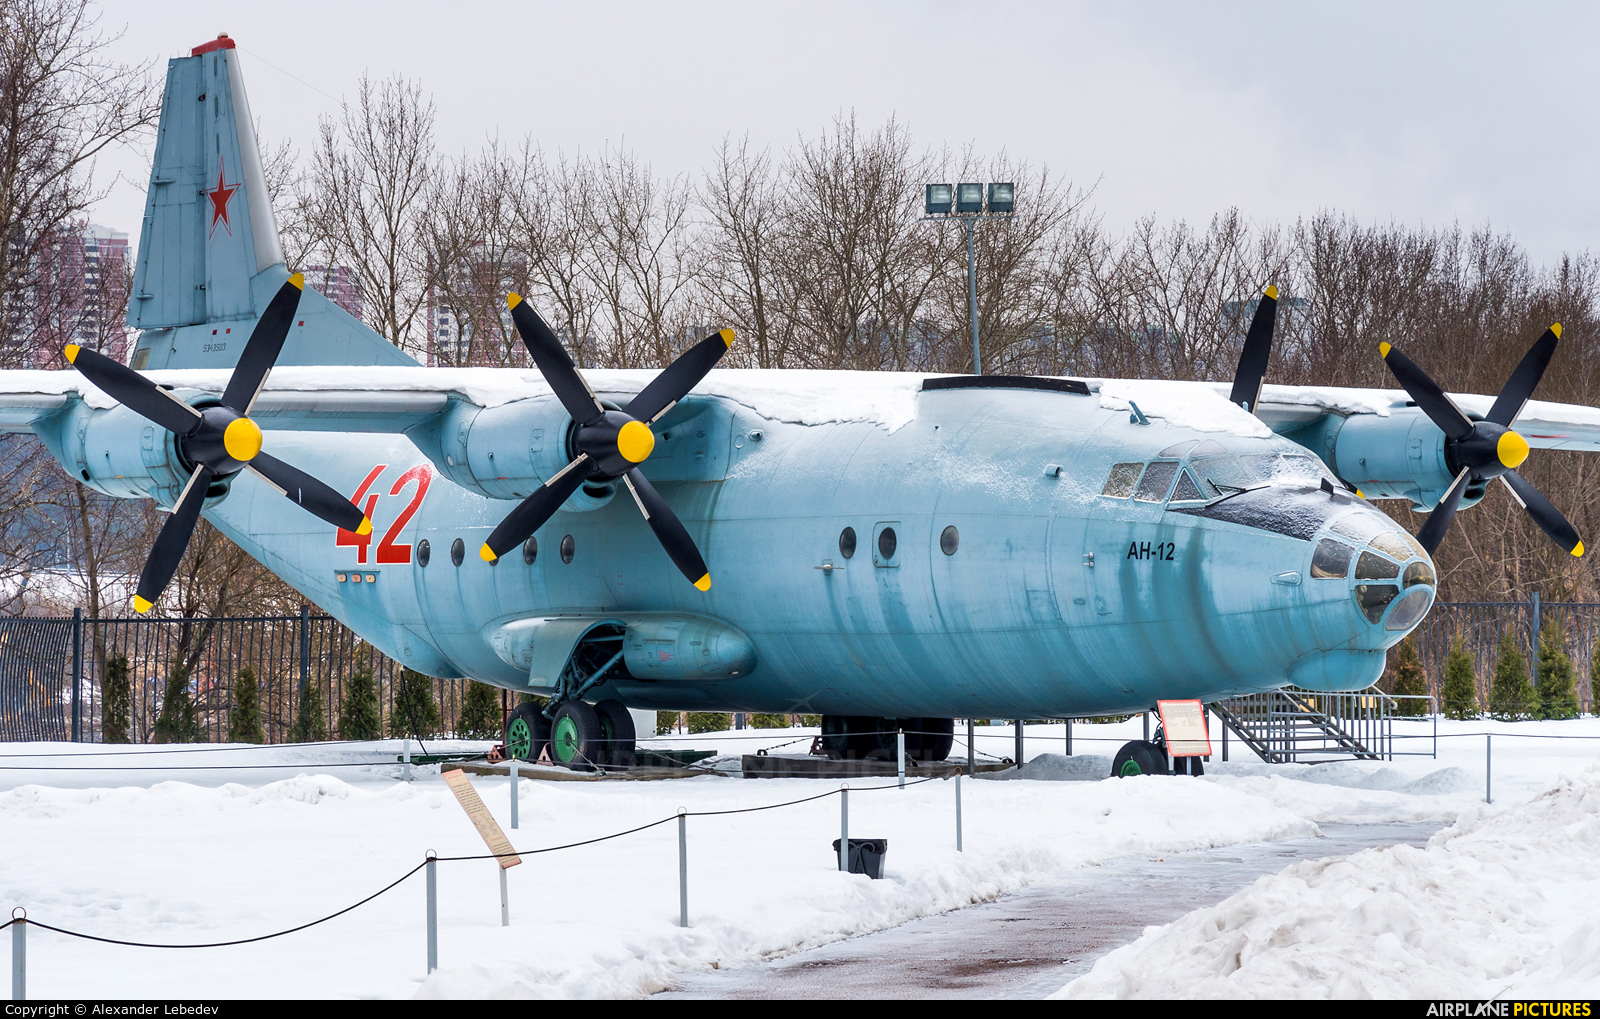 Russia - Navy 42 aircraft at Off Airport - Russia